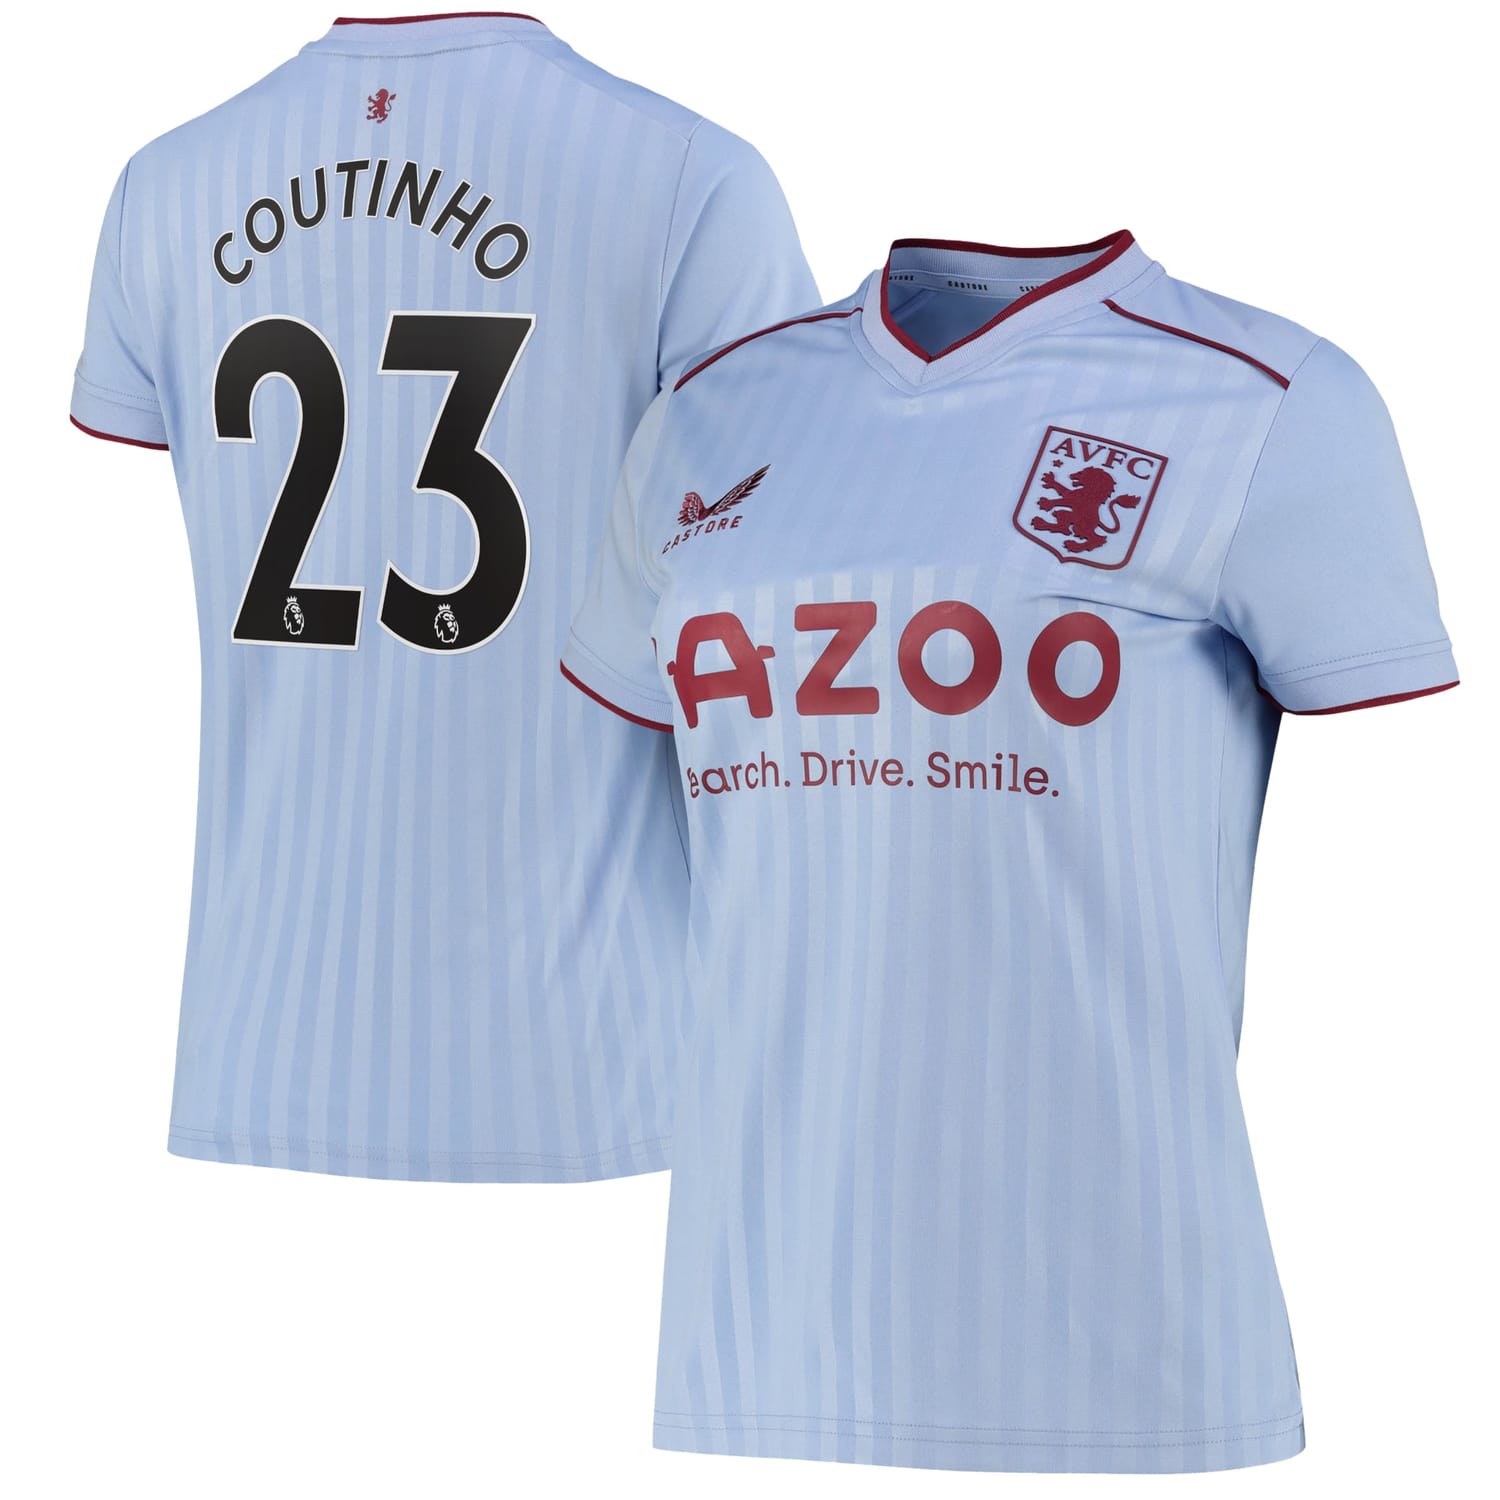 Premier League Ast. Villa Away Jersey Shirt 2022-23 player Philippe Coutinho 23 printing for Women